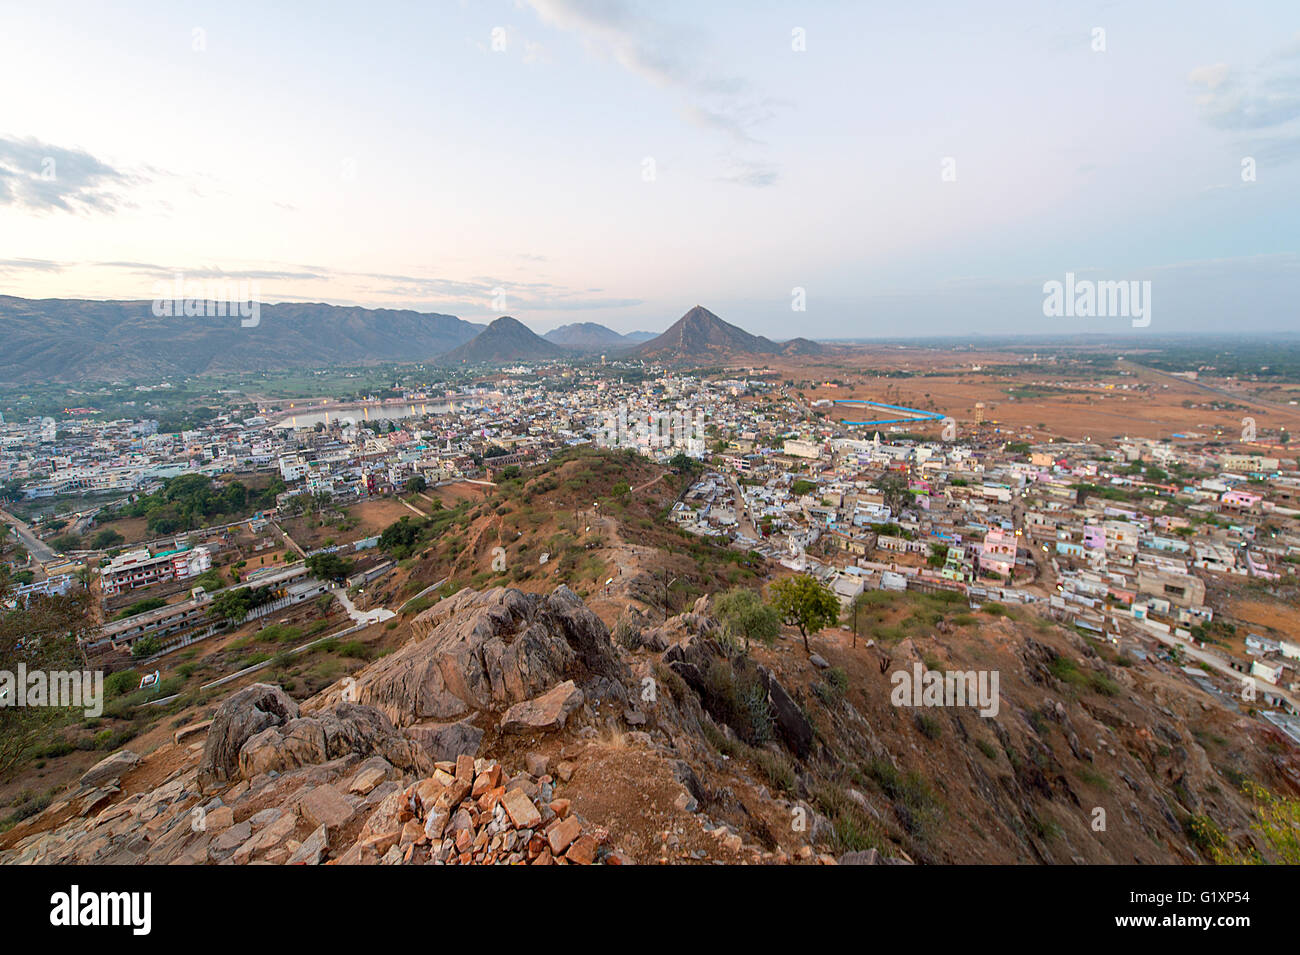 Aeriel view of Pushkar, India town after sunrise from Gayatri Temple during the dull weather. Stock Photo